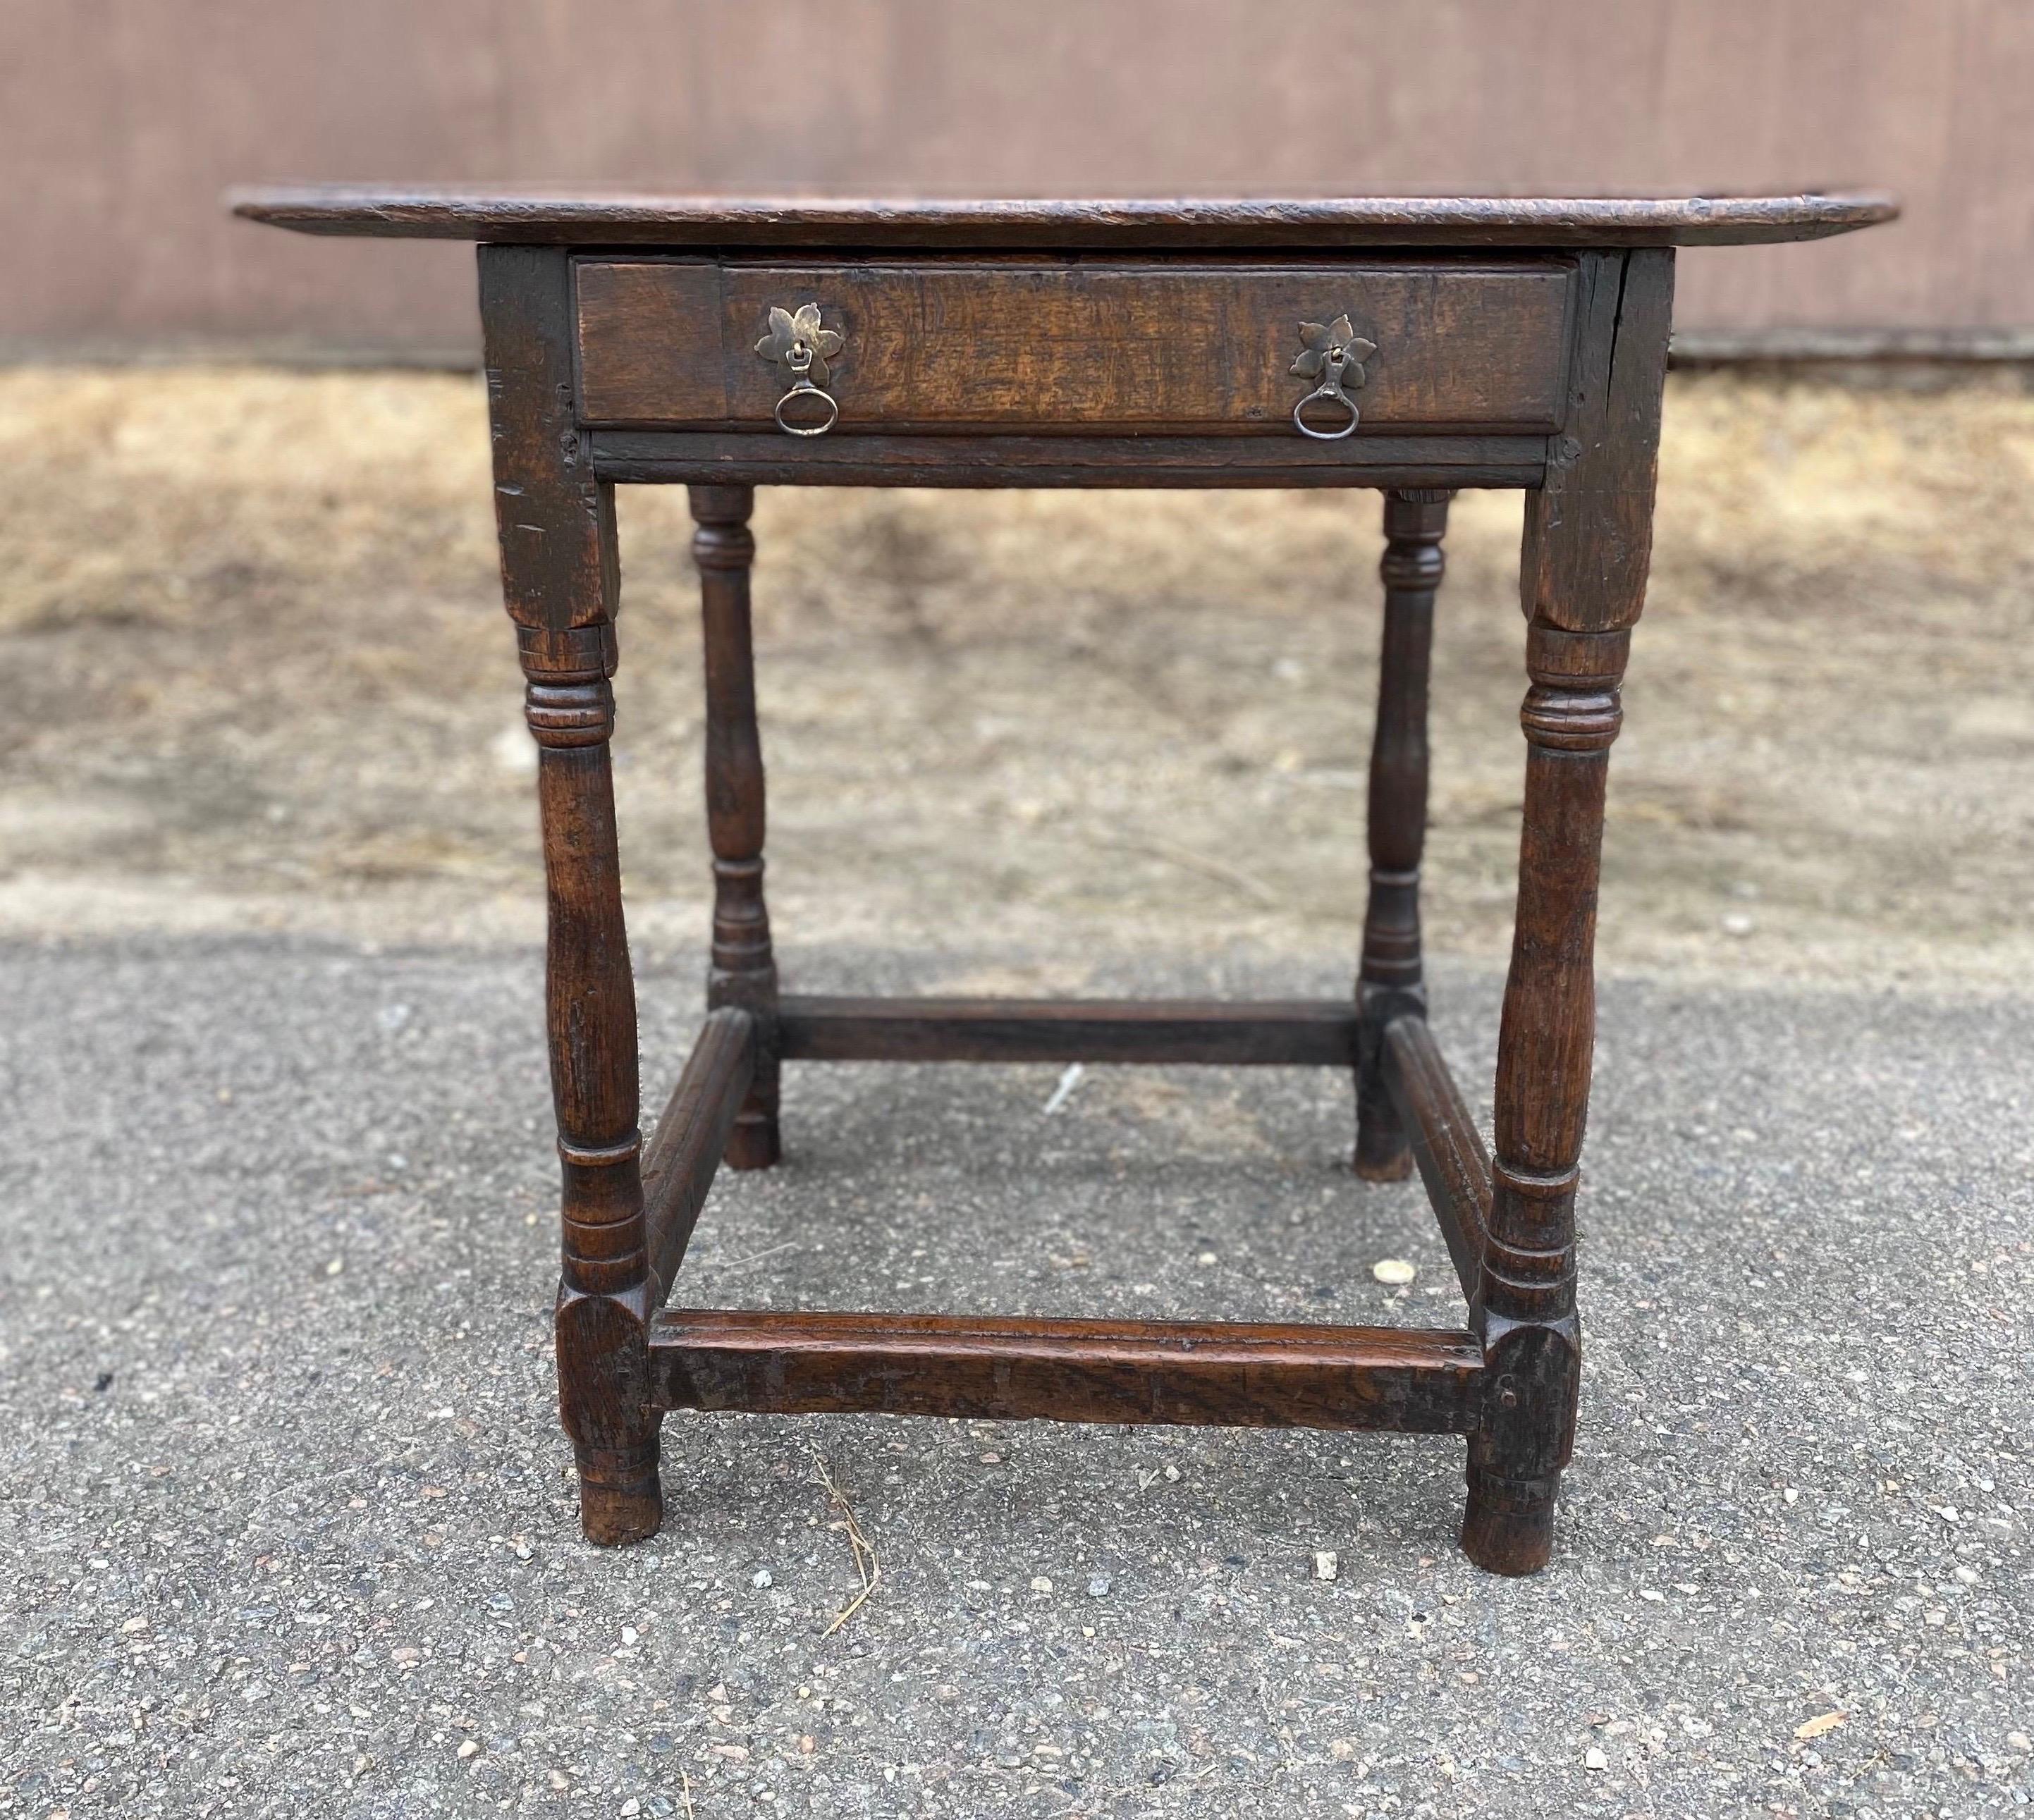 Very early 18th century English oak joint table with drawer. Incredible patina and color. Box stretcher. Wonderful height as a side table or end table.